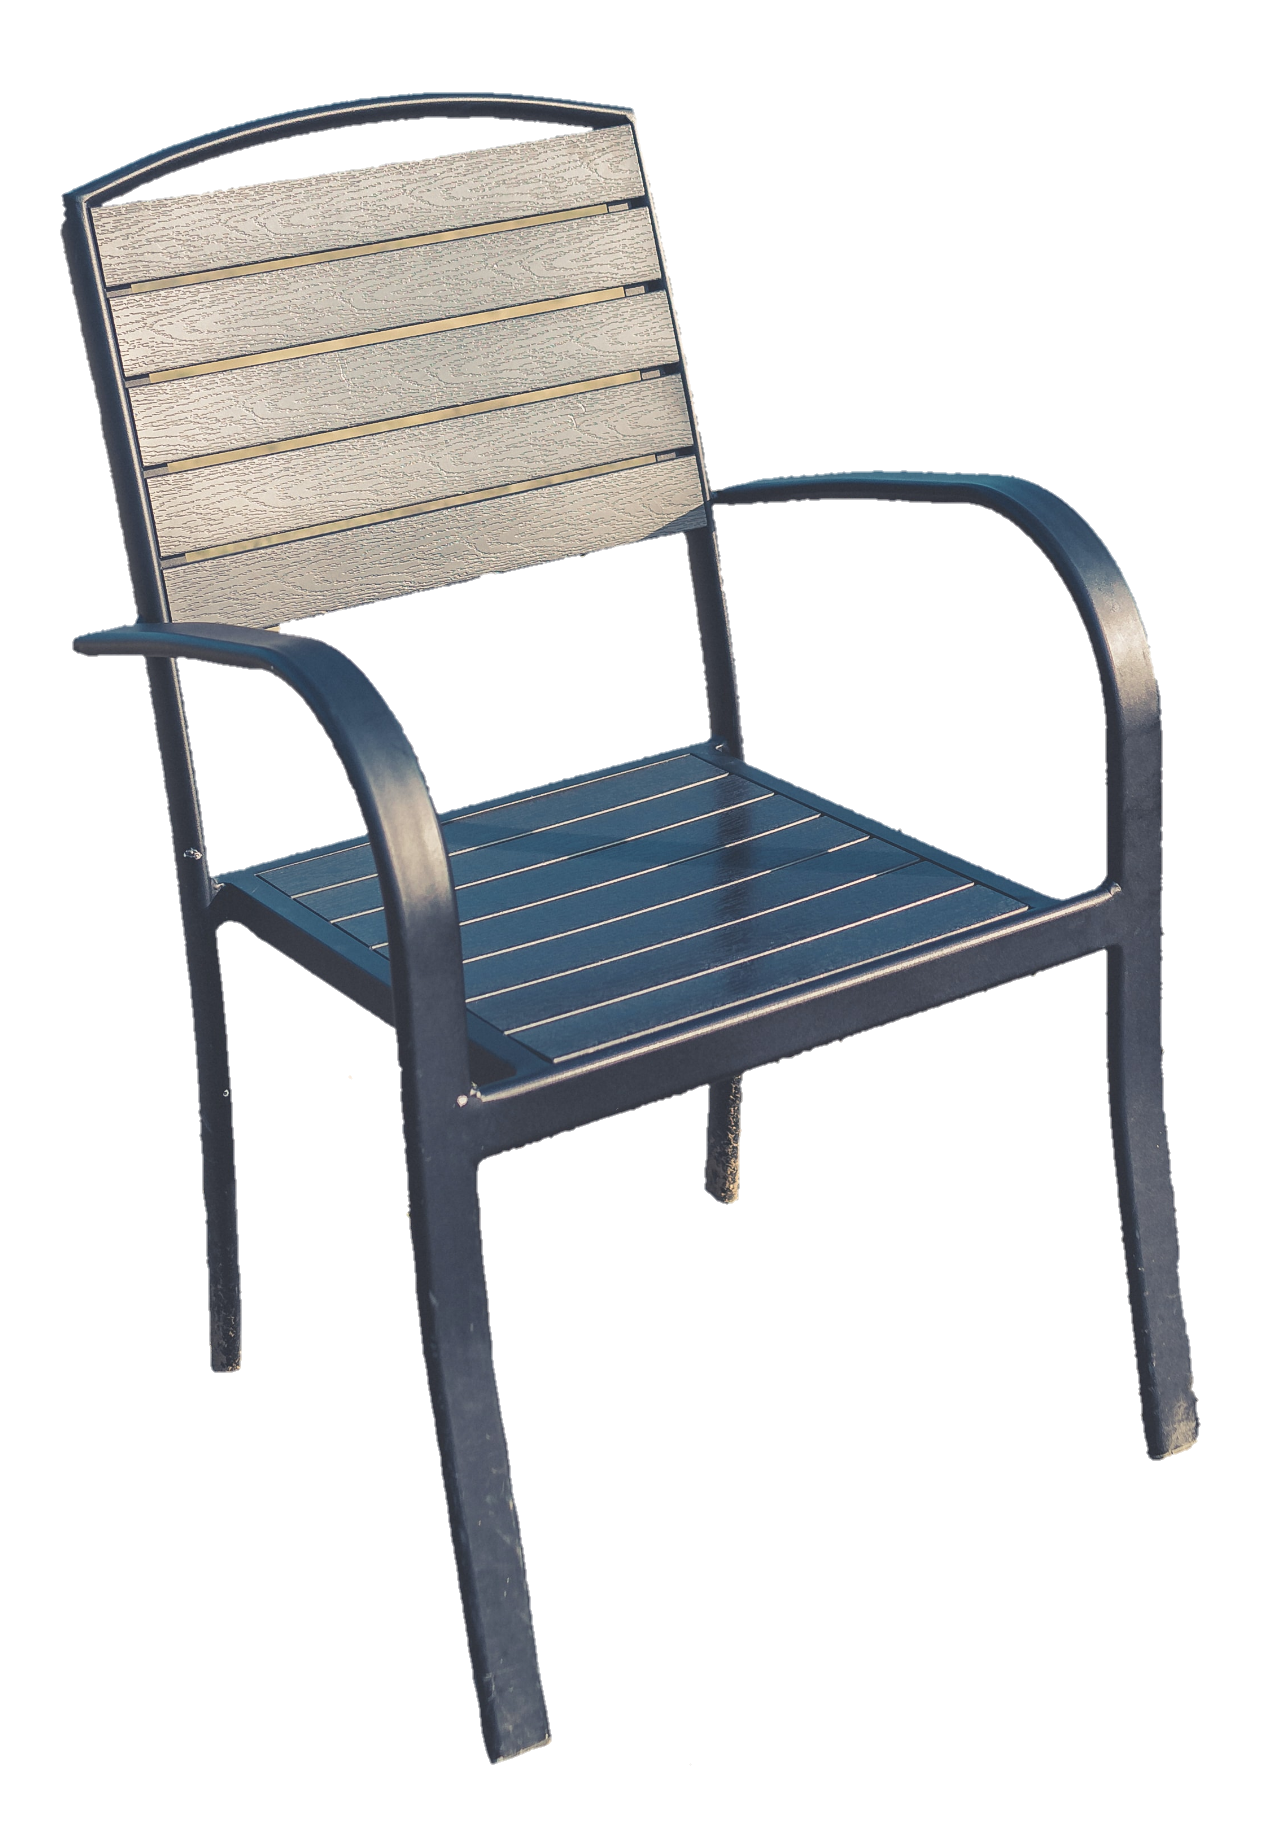 chair-png-image-pngfre-7